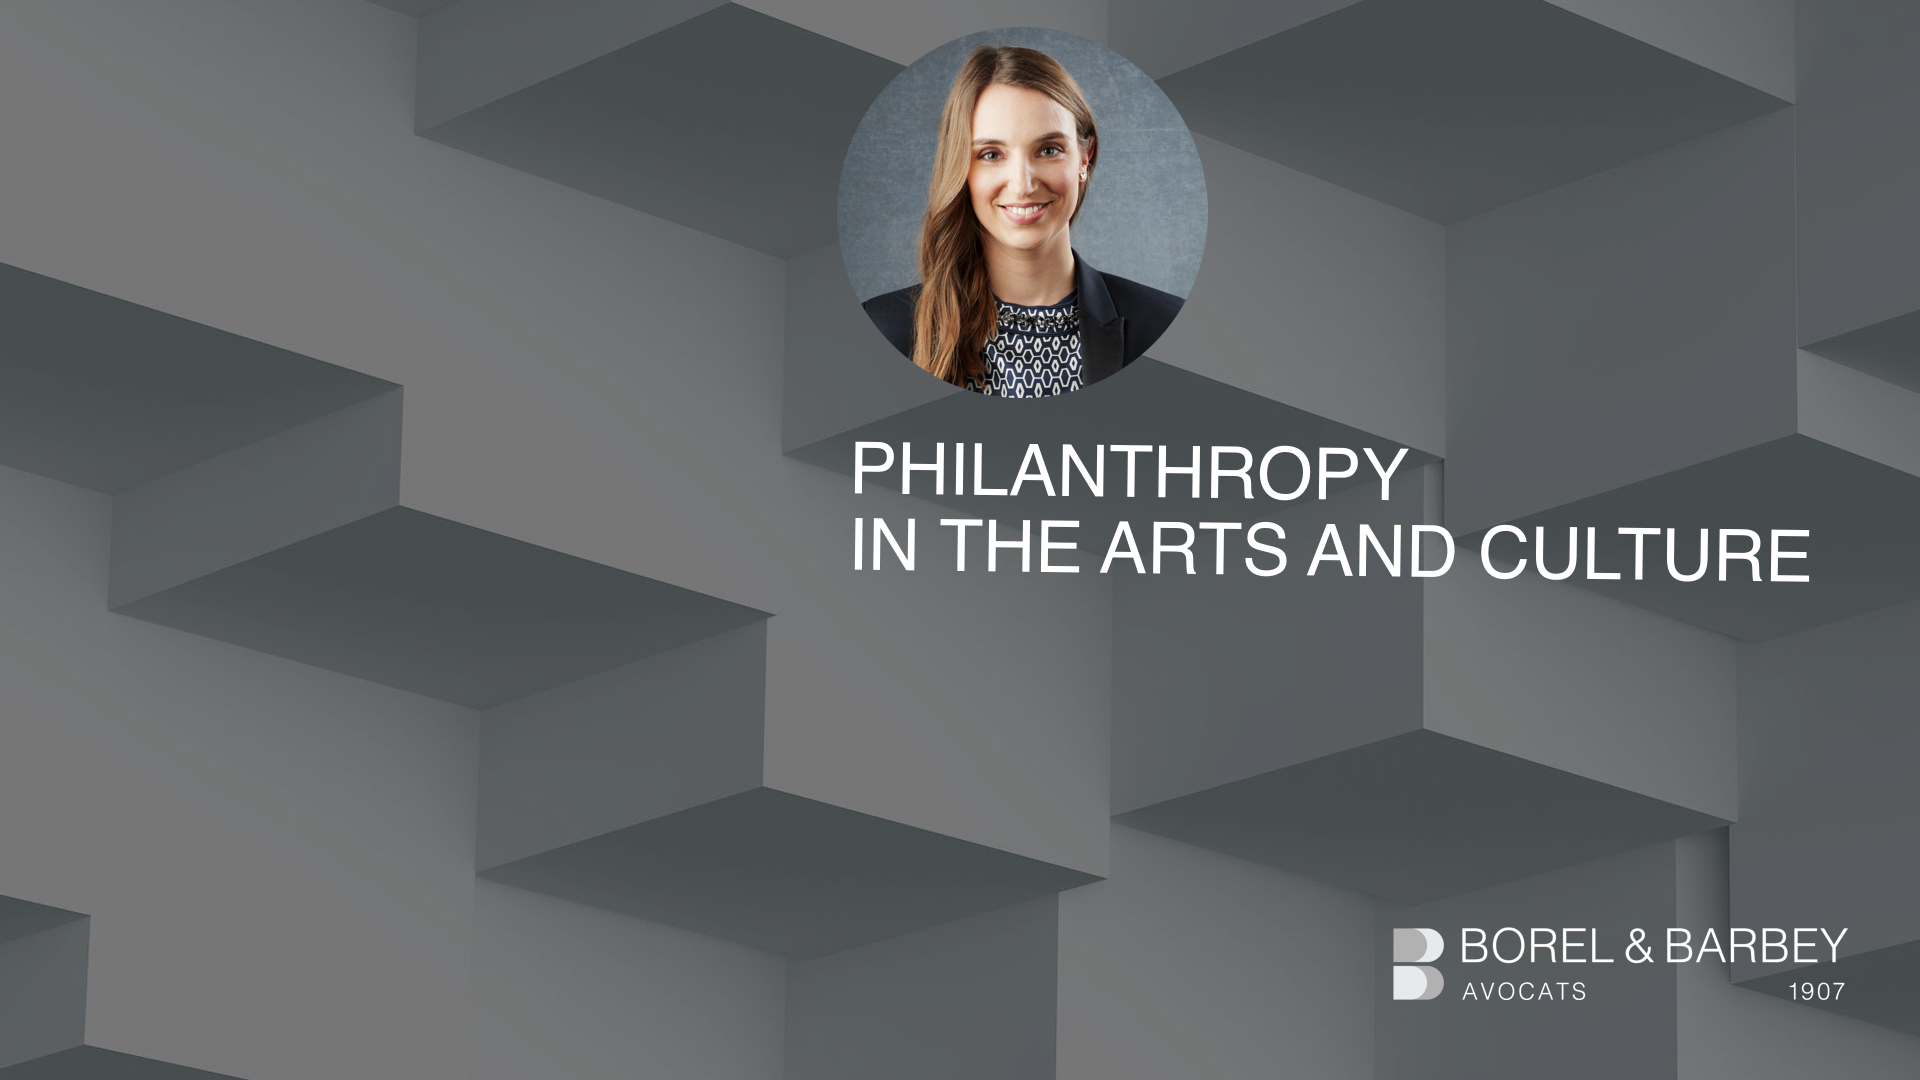 The art of giving: The motivations of artists as philanthropists